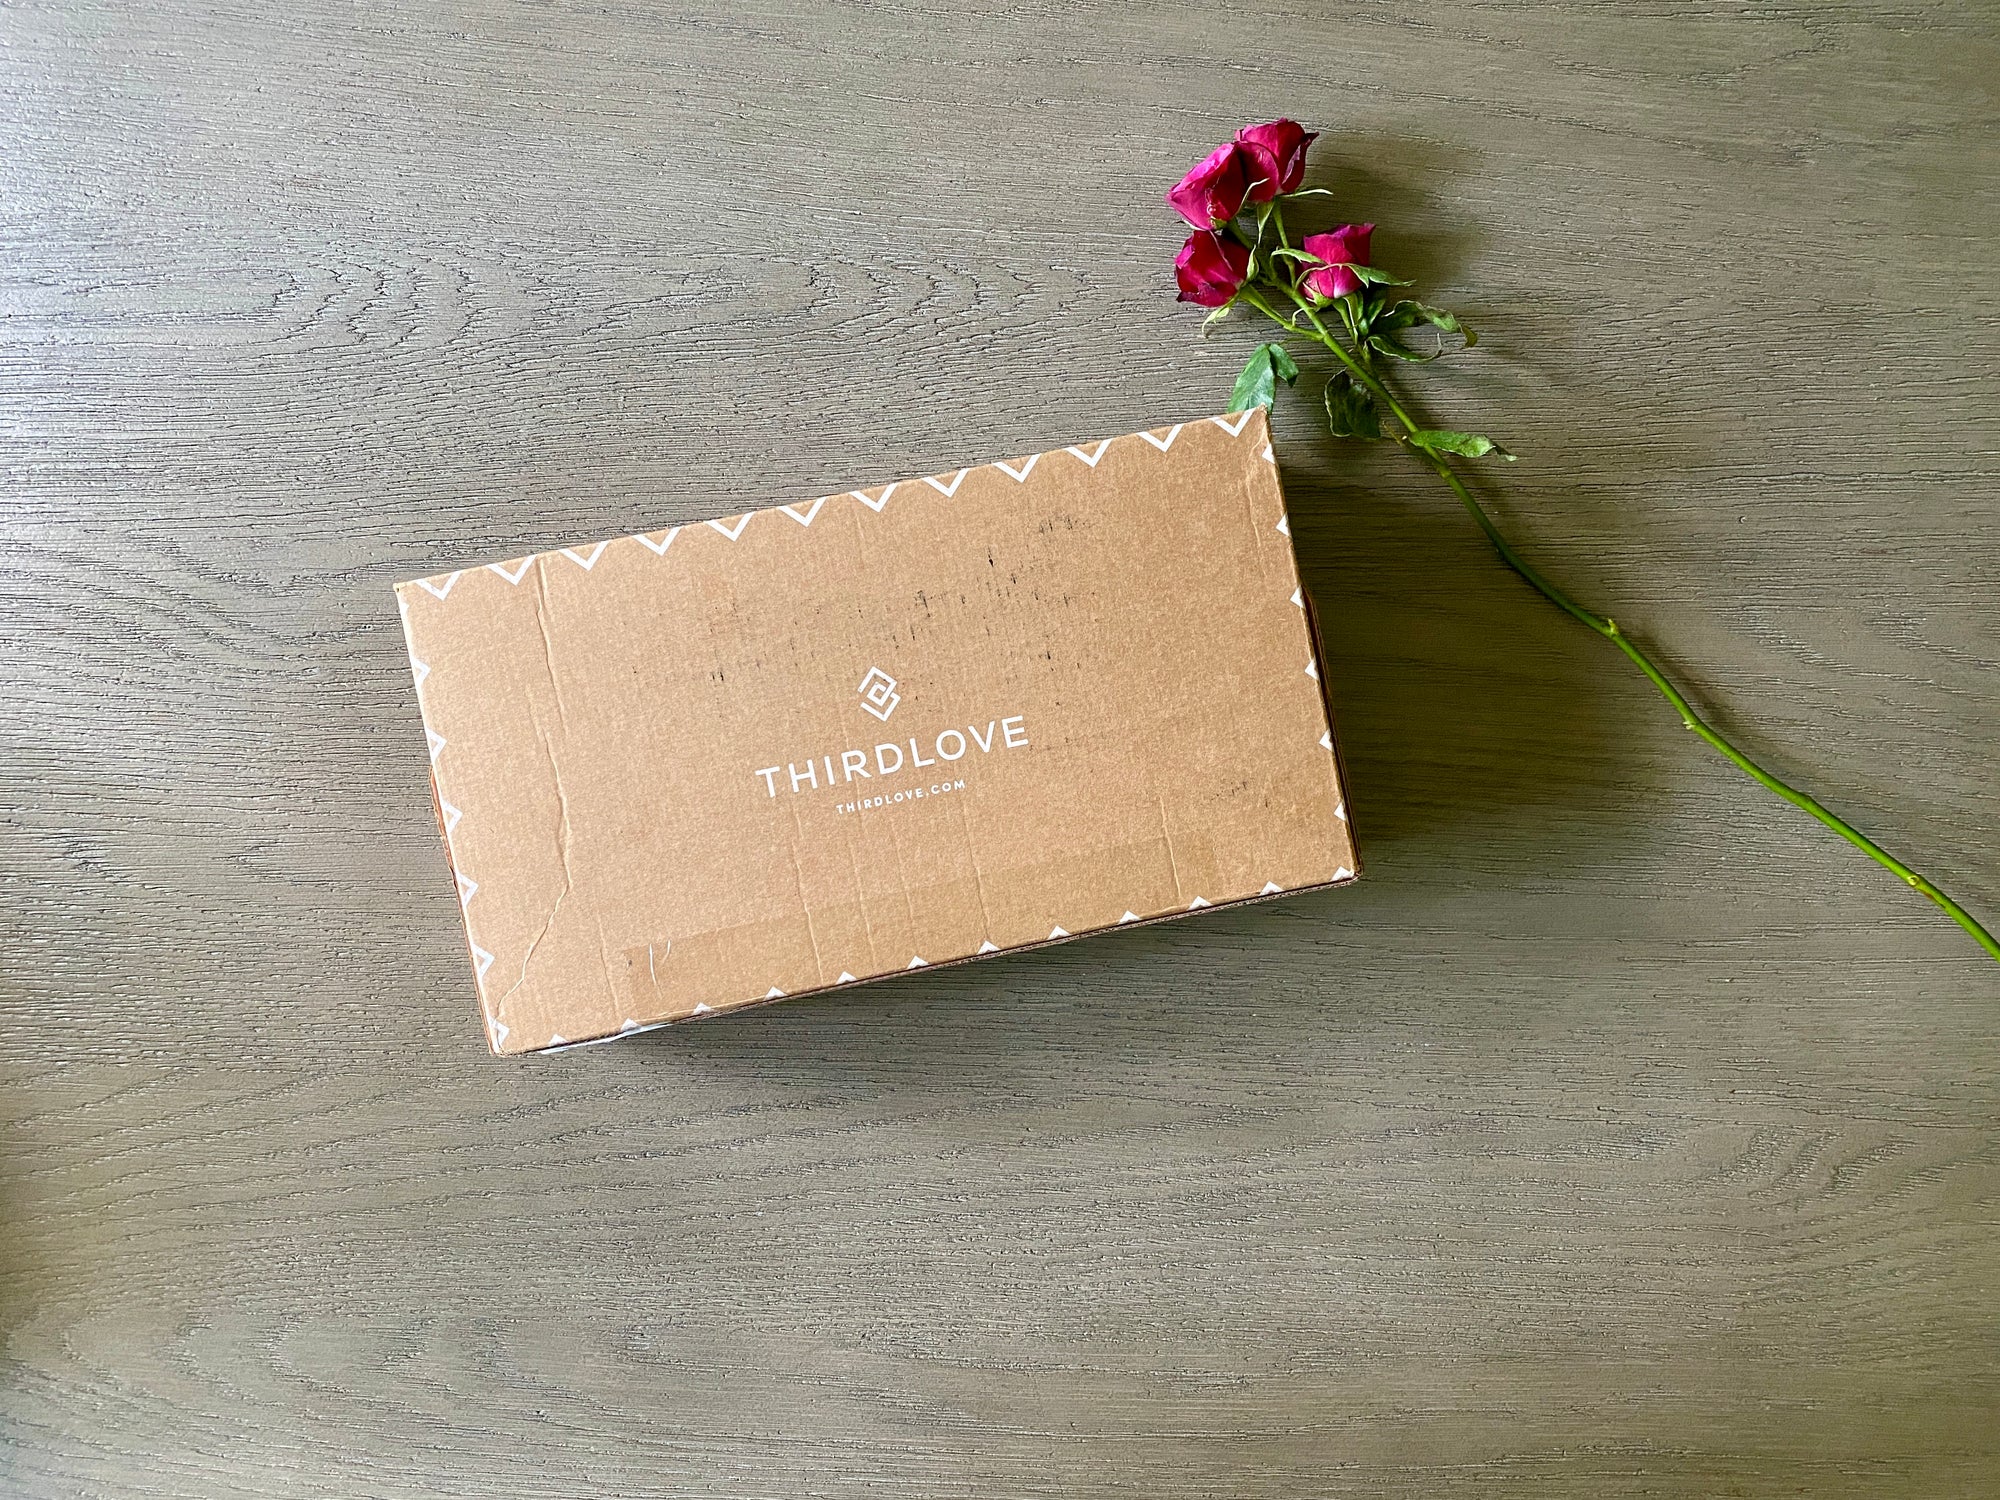 ThirdLove Review - Worth The Social Media Buzz?